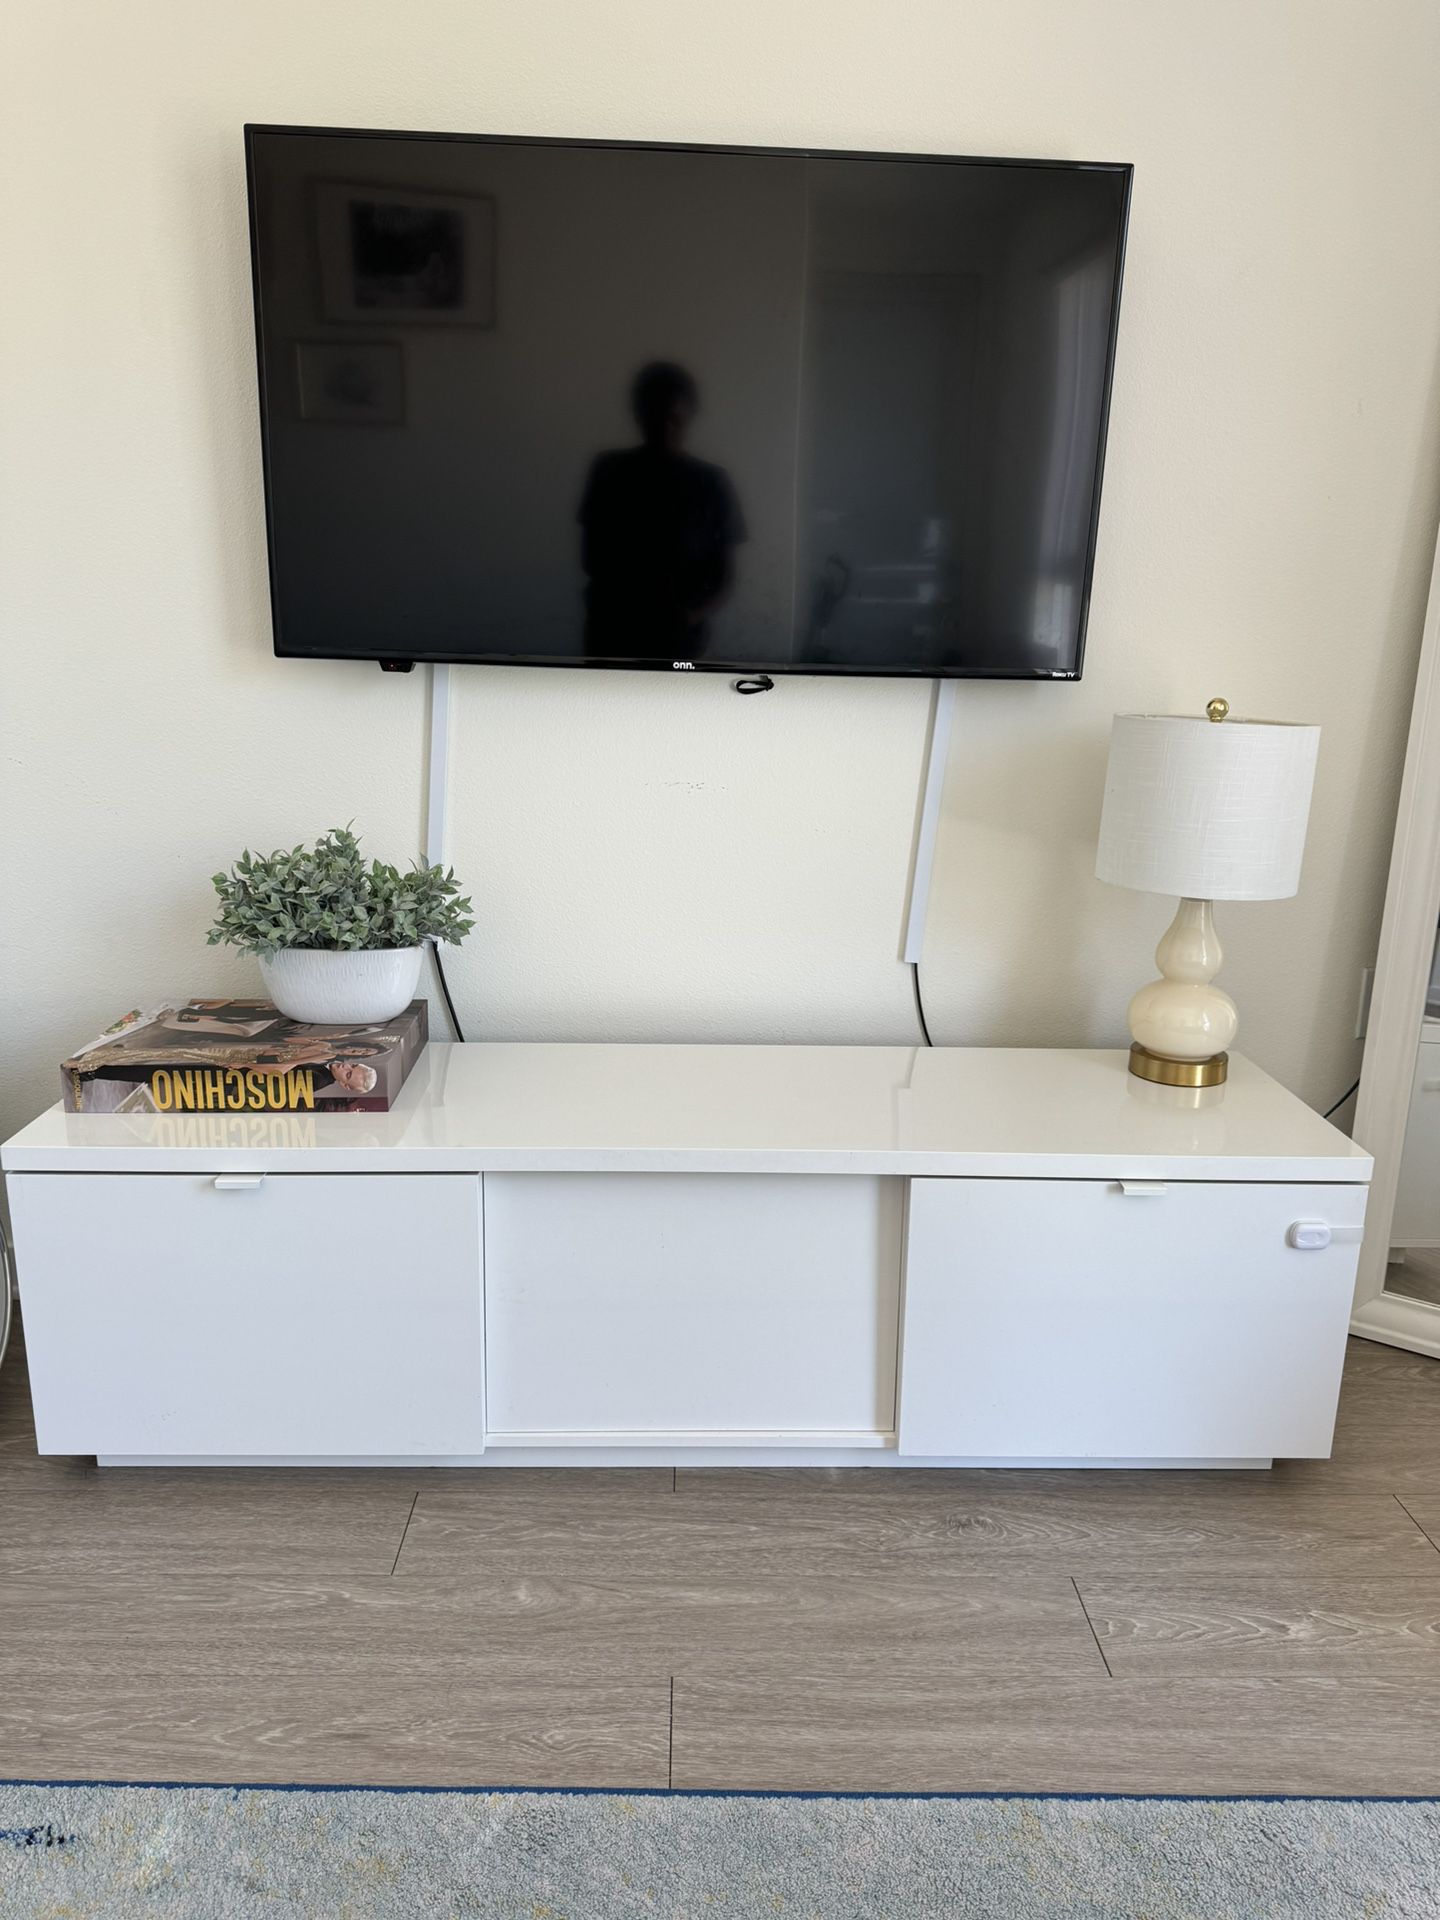 TV + lamp + TV stand + Plant 